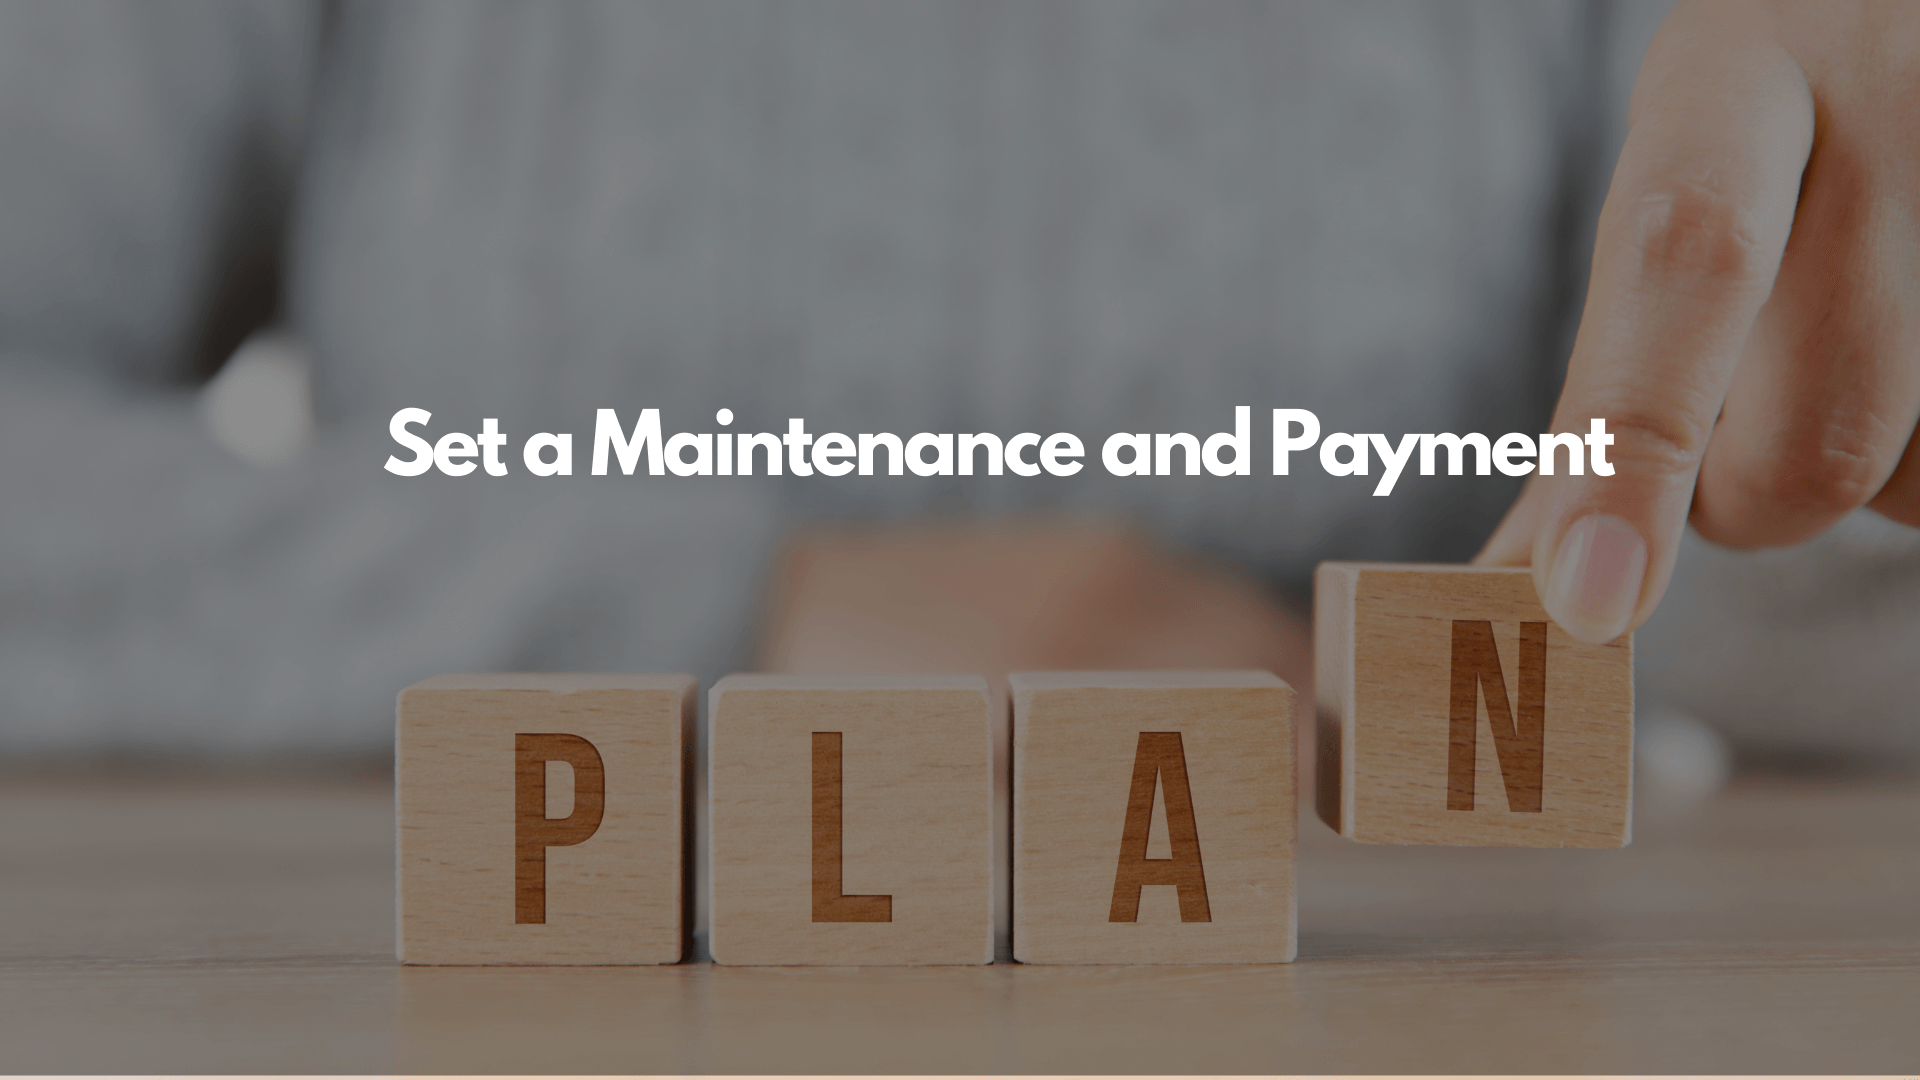 Maintenance Plan for your investment property or rental.